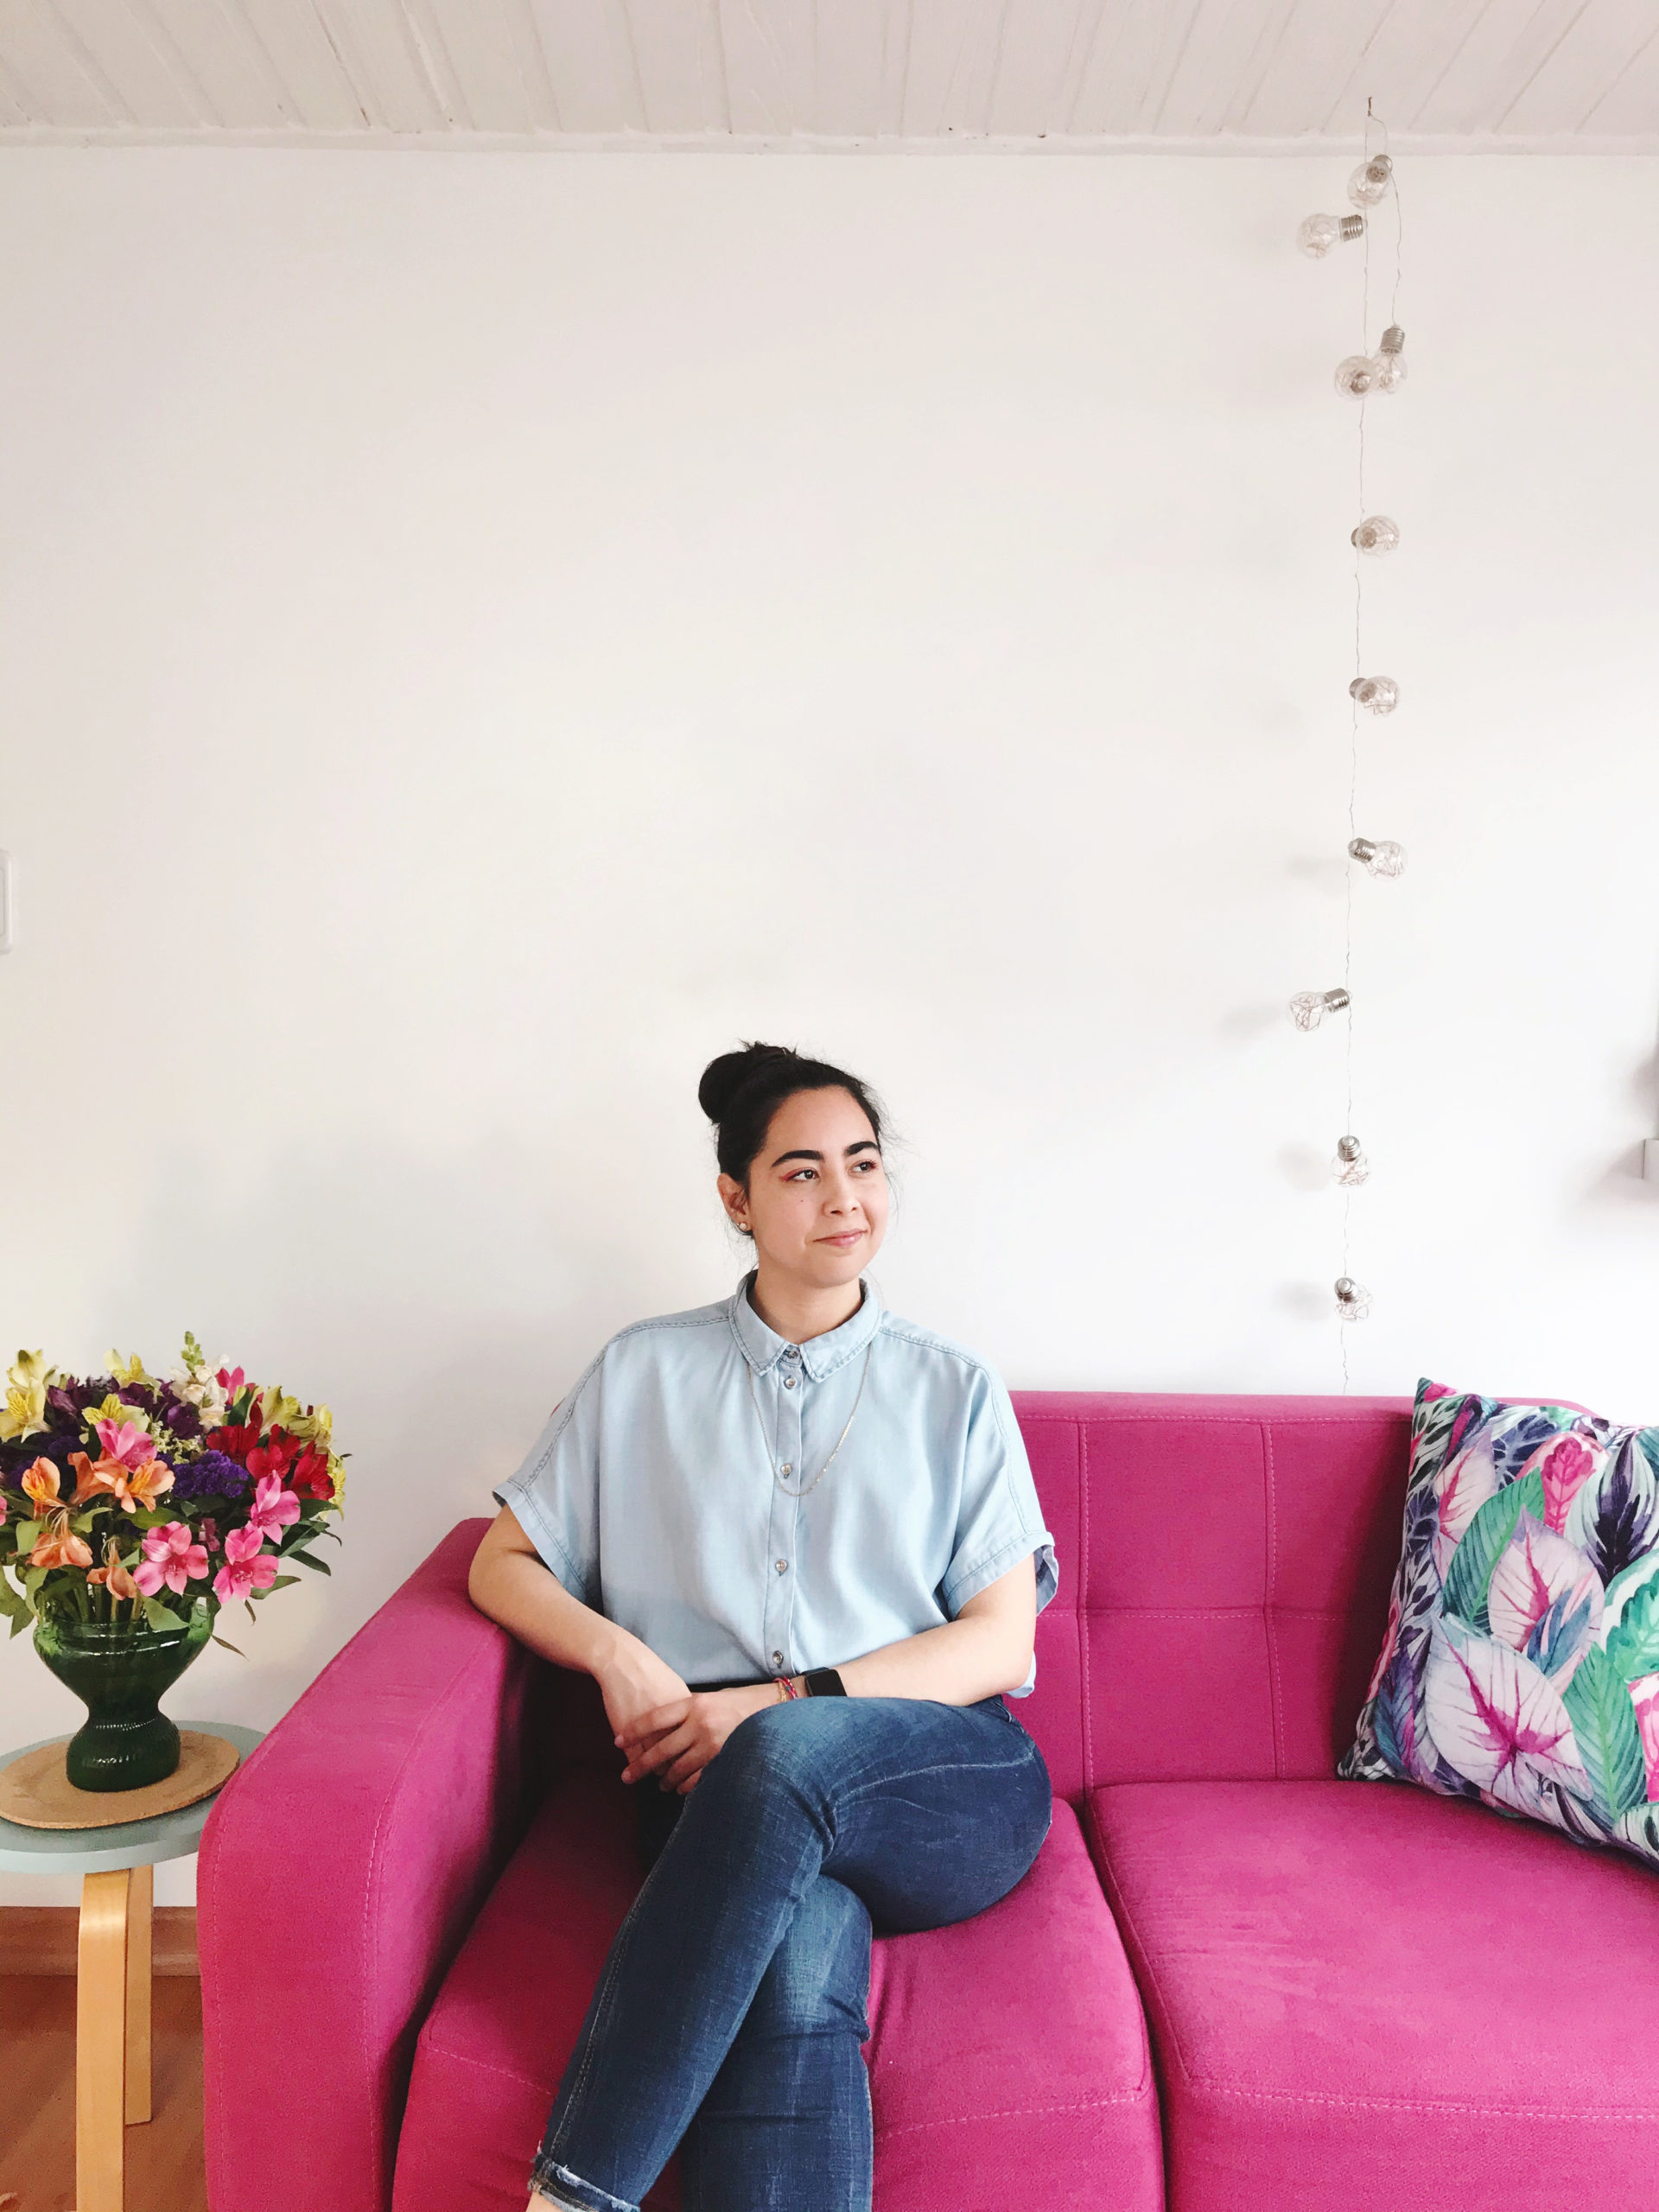 Nubia Navarro sitting on a pink couch against a mostly blank white wall.